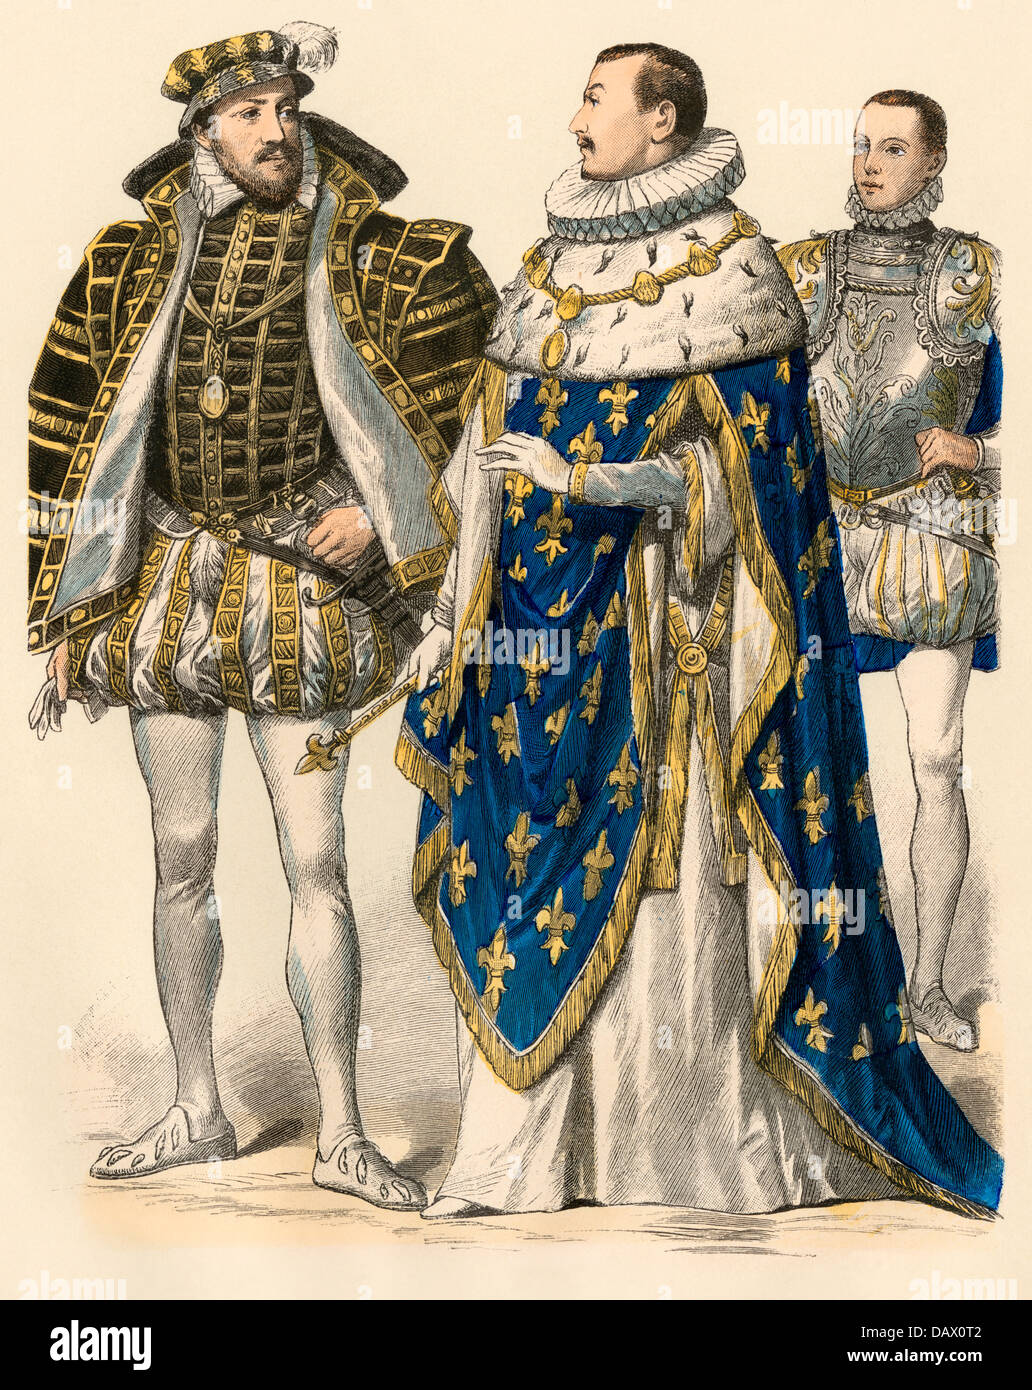 King of Navarre Antoine de Bourbon (left); Charles IX, King of France (center); and Francis II, young King of France, 1500s. Hand-colored print Stock Photo